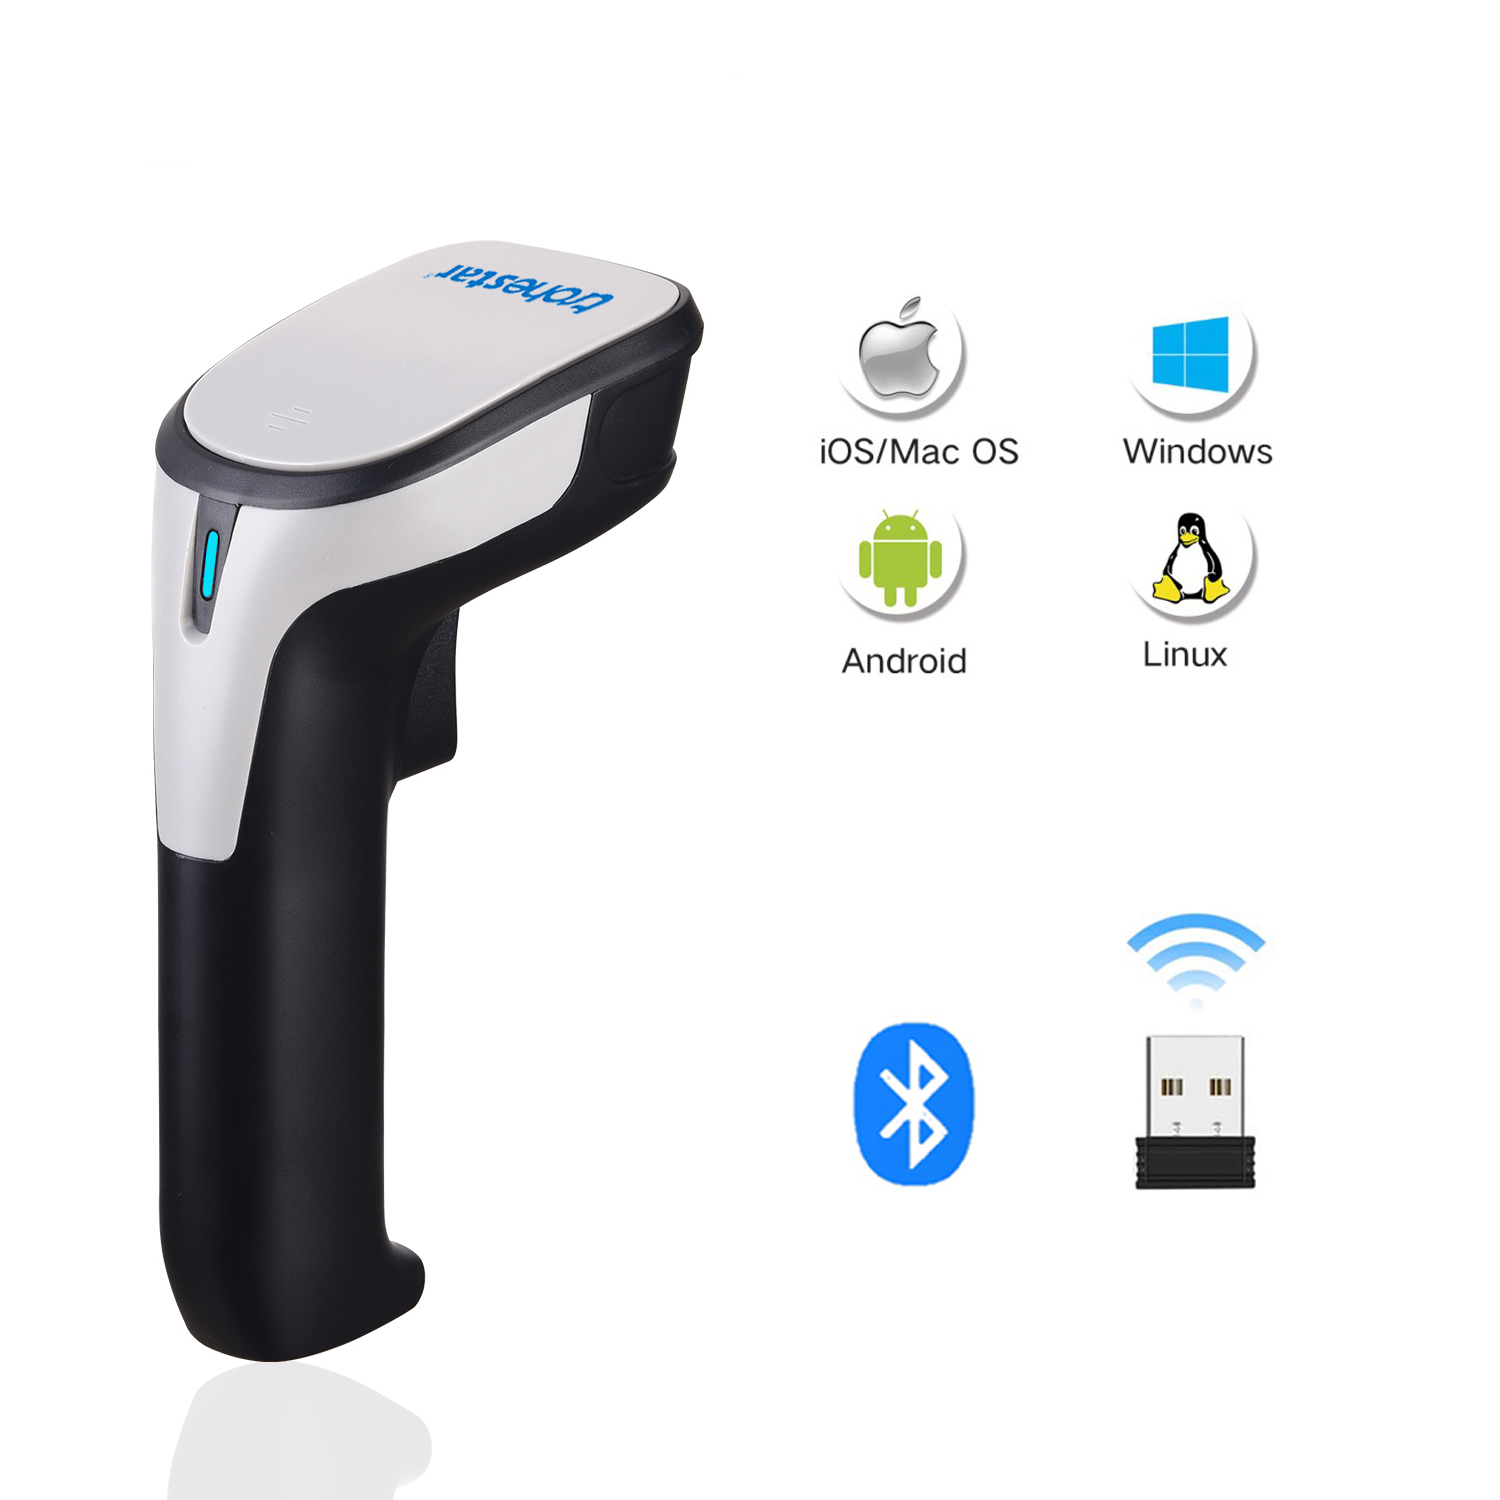 2020 Upgrade Trohestar Wireless Barcode Scanner with Charging Cradle 3-in-1 Wired & Wireless 1D Laser Bar Code Reader USB Charging Base Handheld Scanner for Supermarket Retail Warehouse Bookstore